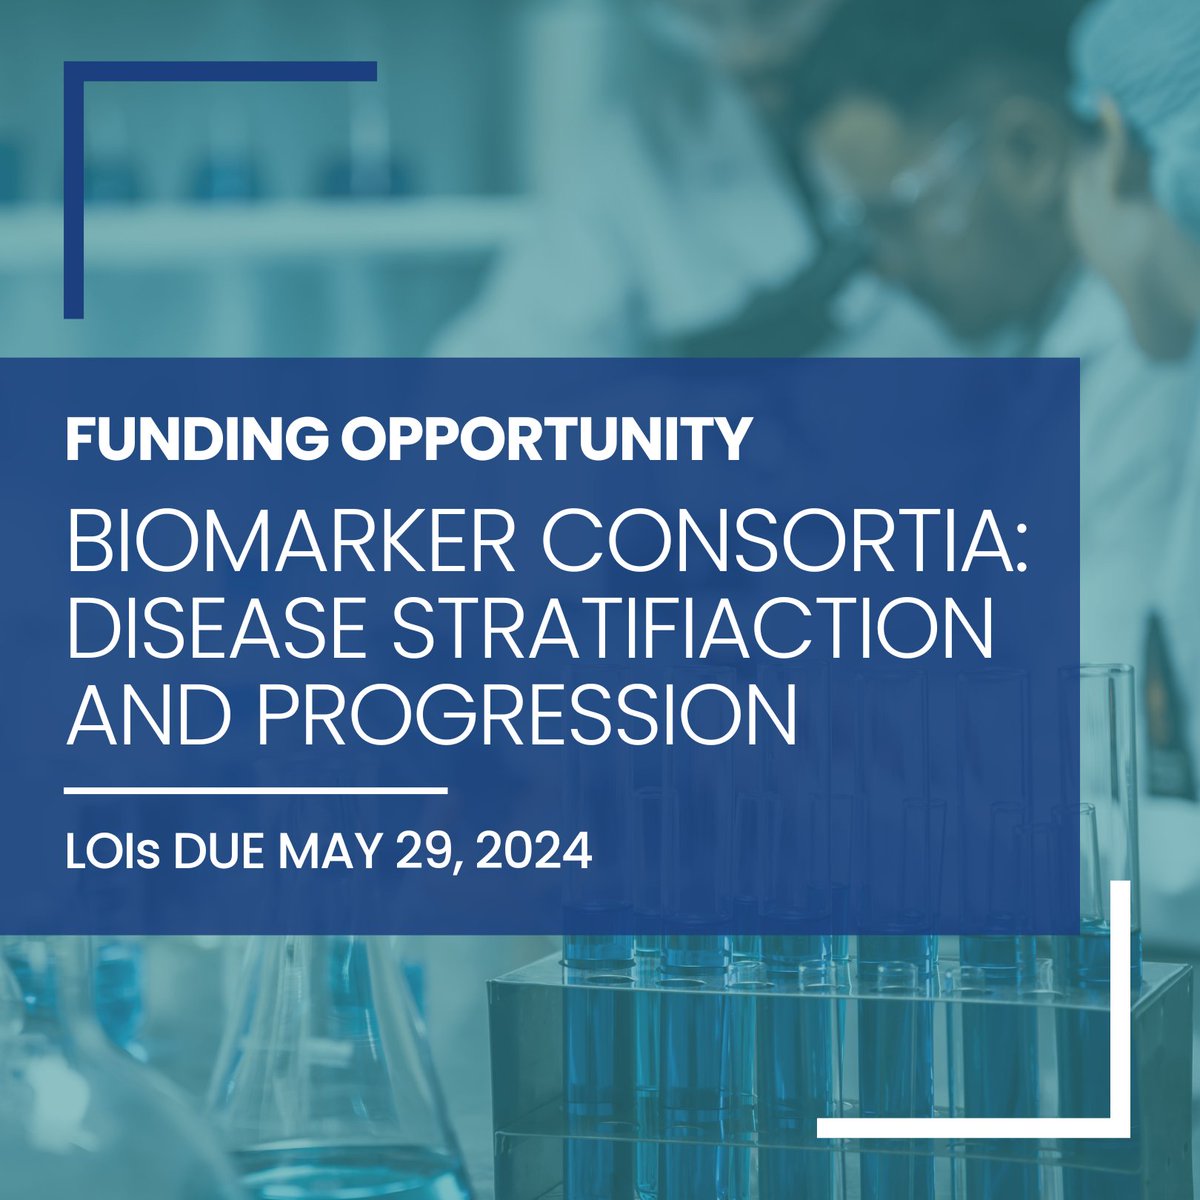 🔬 New funding opportunity! 🔬 We are seeking collaborative groups to work on identifying novel biomarkers for disease stratification and progression in ALS. LOIs are due May 29, 2024. Learn more and submit your LOI at bit.ly/4ctIZrj. #ALSResearch #GrantOpportunity